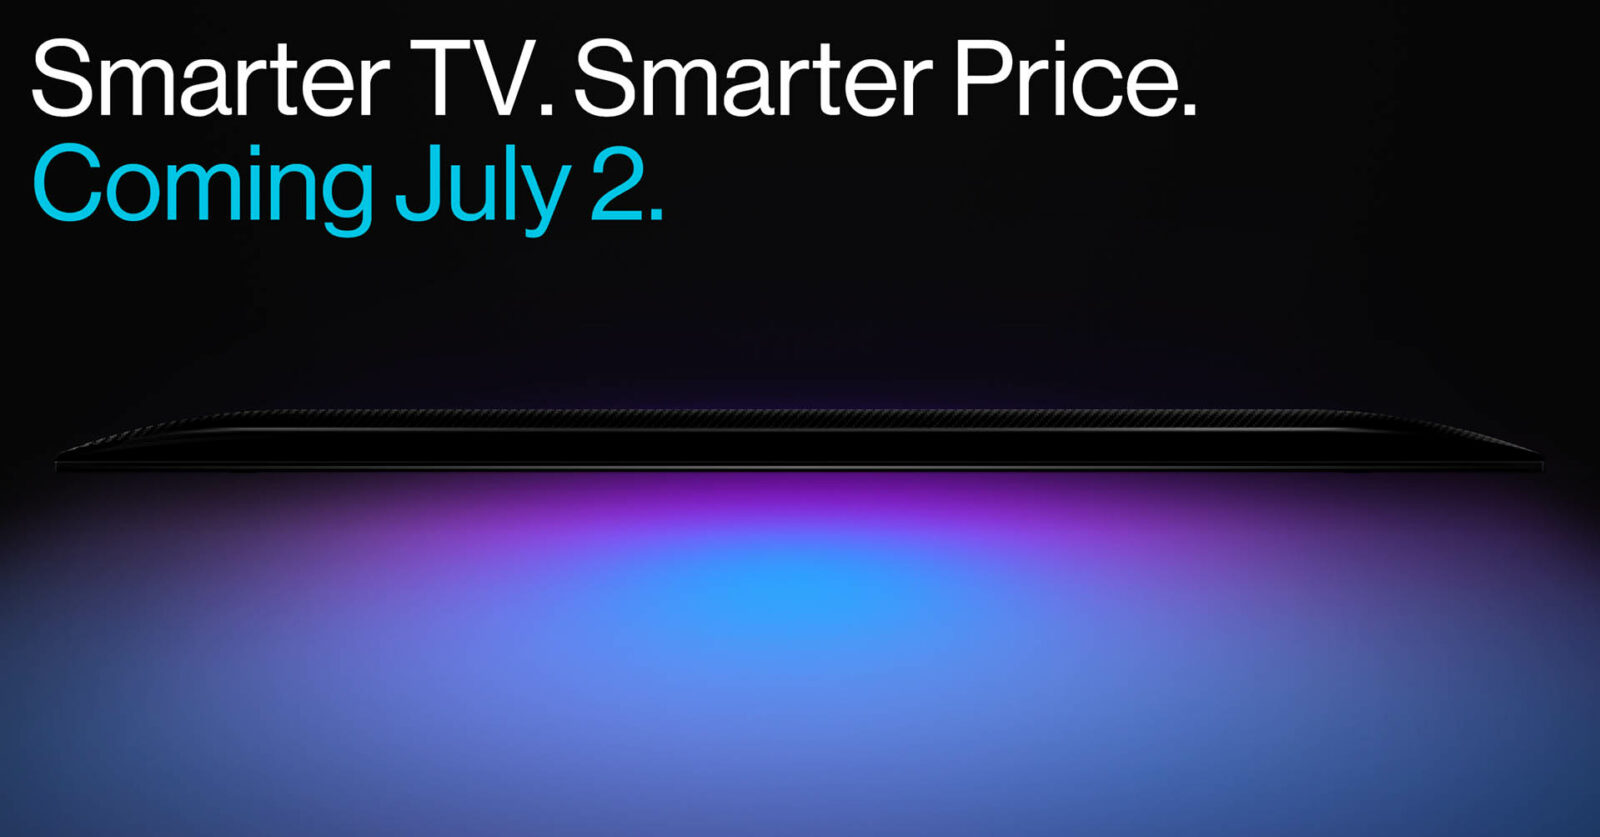 OnePlus to Launch Affordable TV in India On July 2